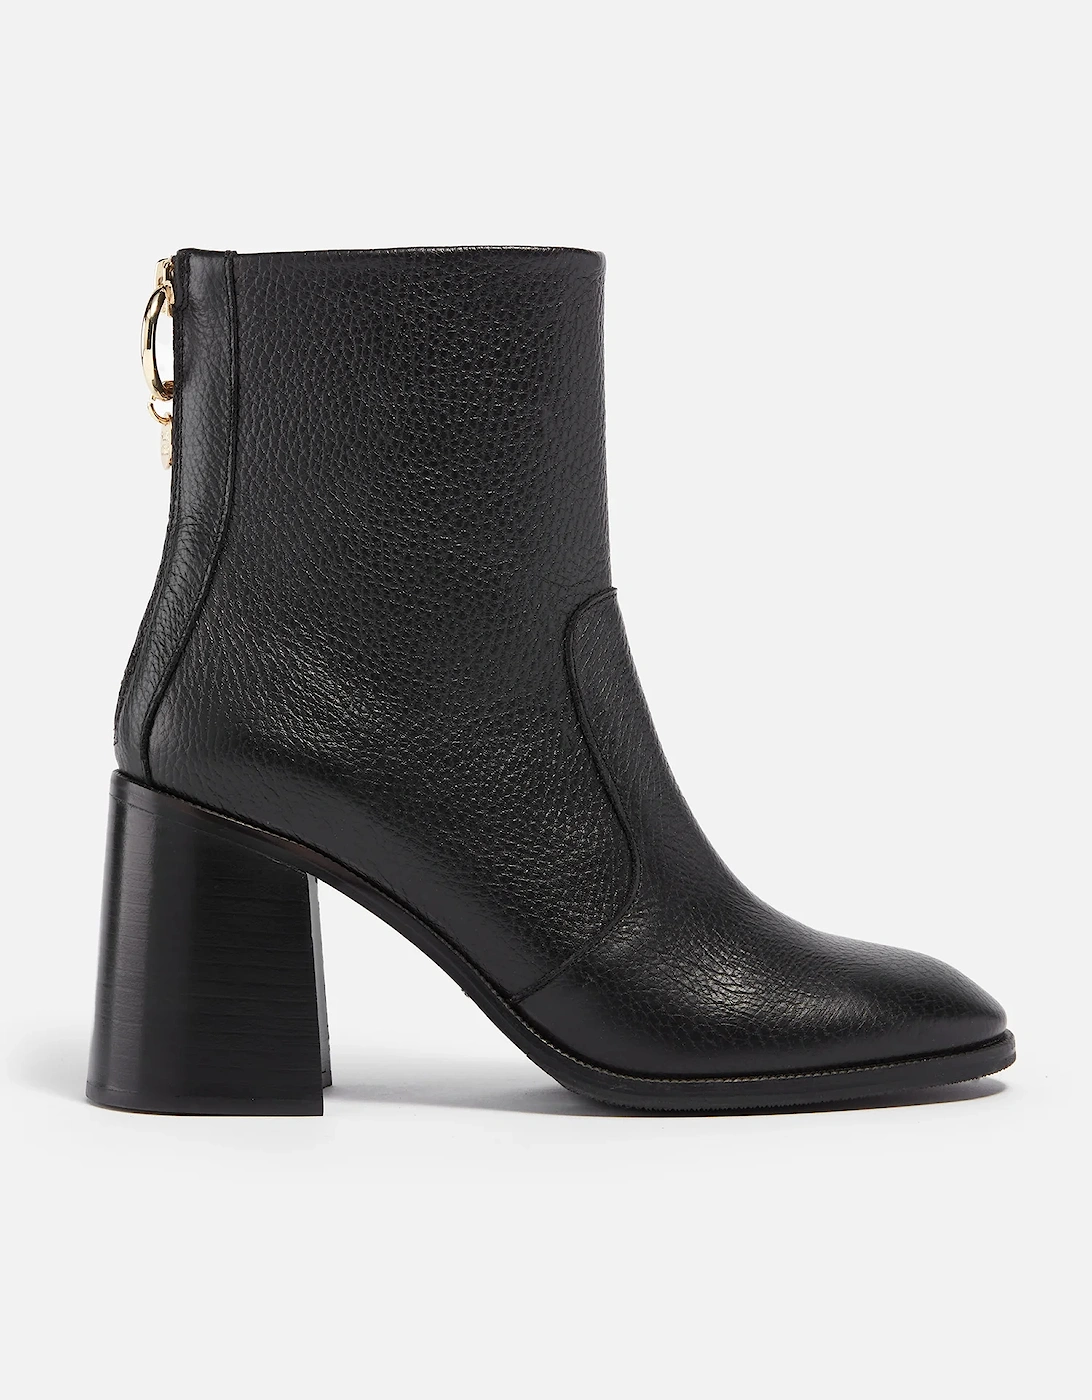 See by Chloé Aryel Leather Heeled Boots - See By Chloé - Daniela - Home - Women's Shoes - Women's Boots - Women's Heeled Boots - See by Chloé Aryel Leather Heeled Boots, 2 of 1